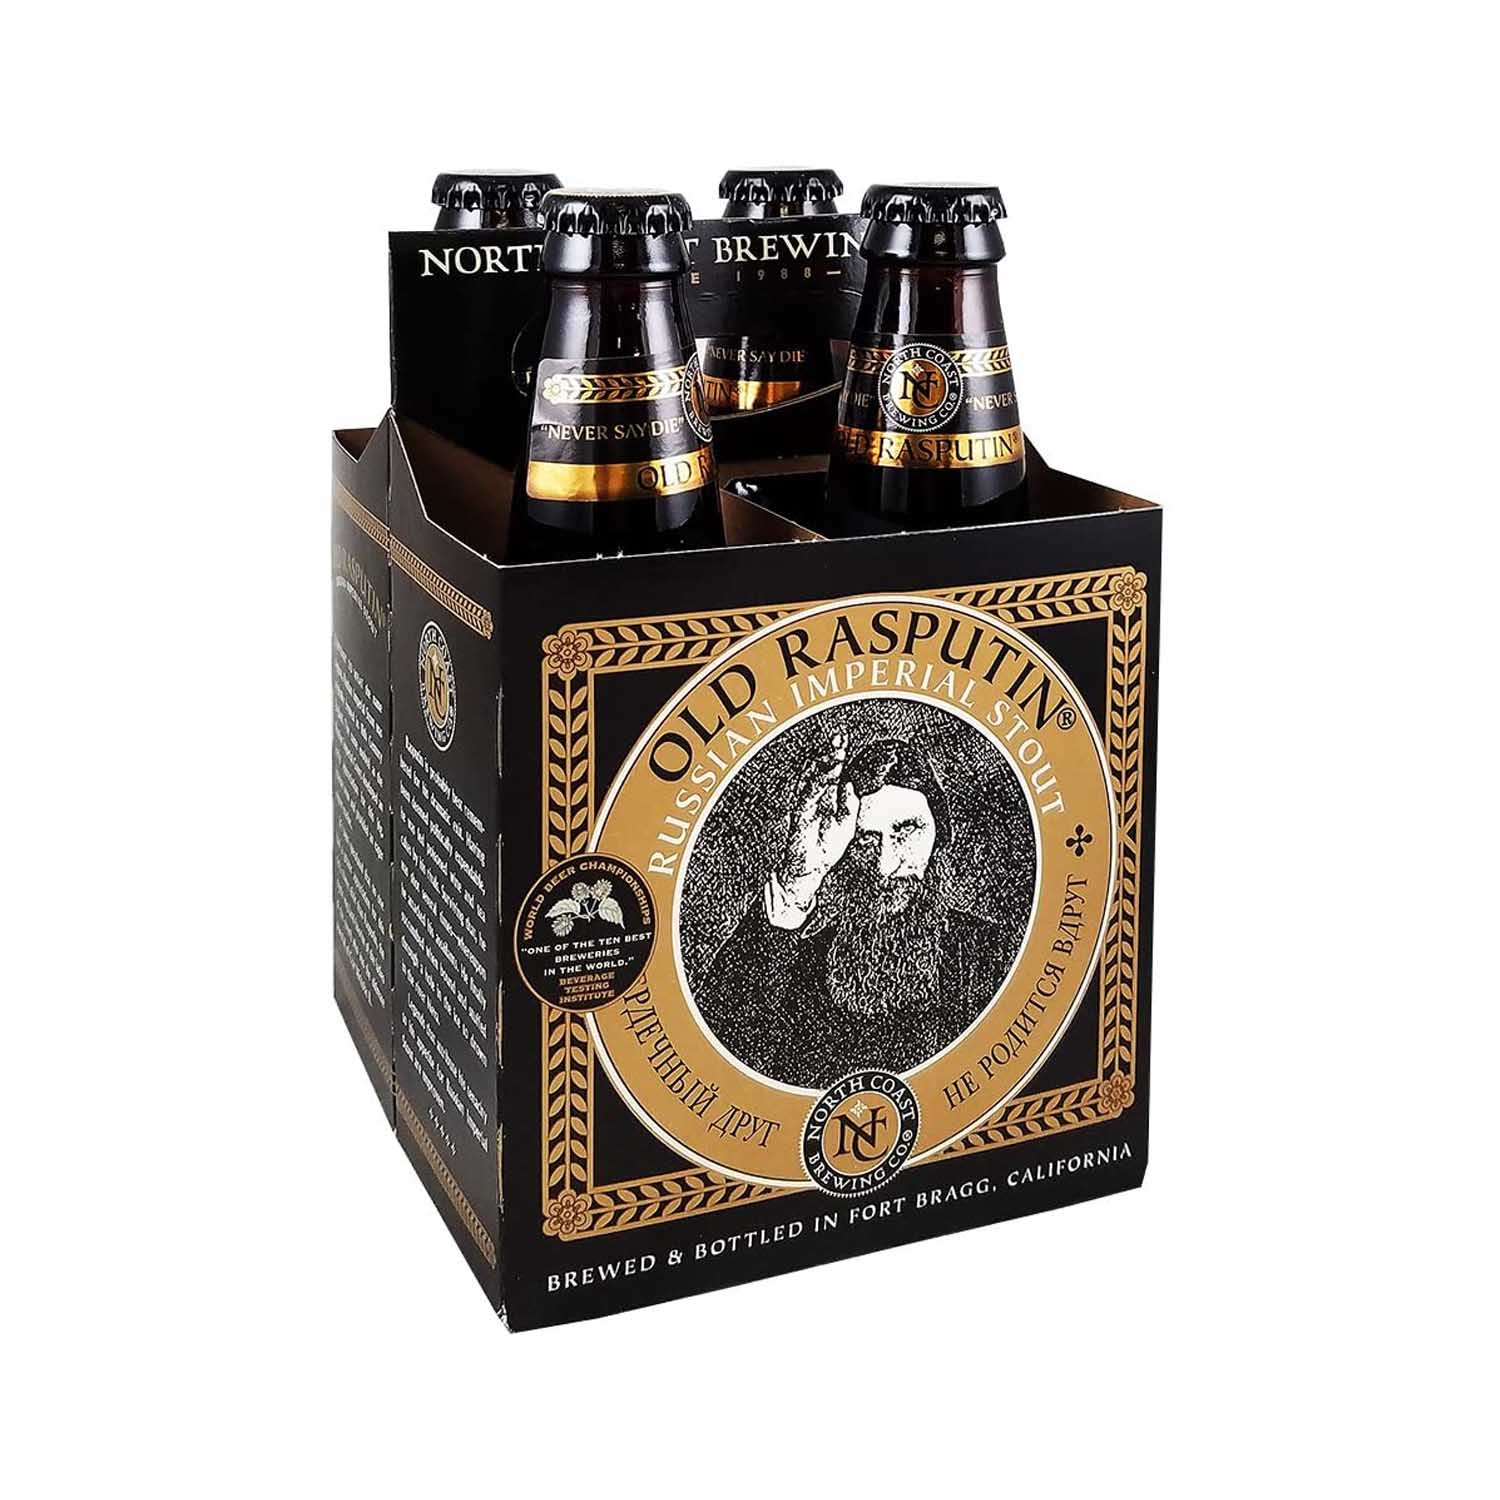 4 Pack cerveza Old Rasputin Russian Imperial Stout